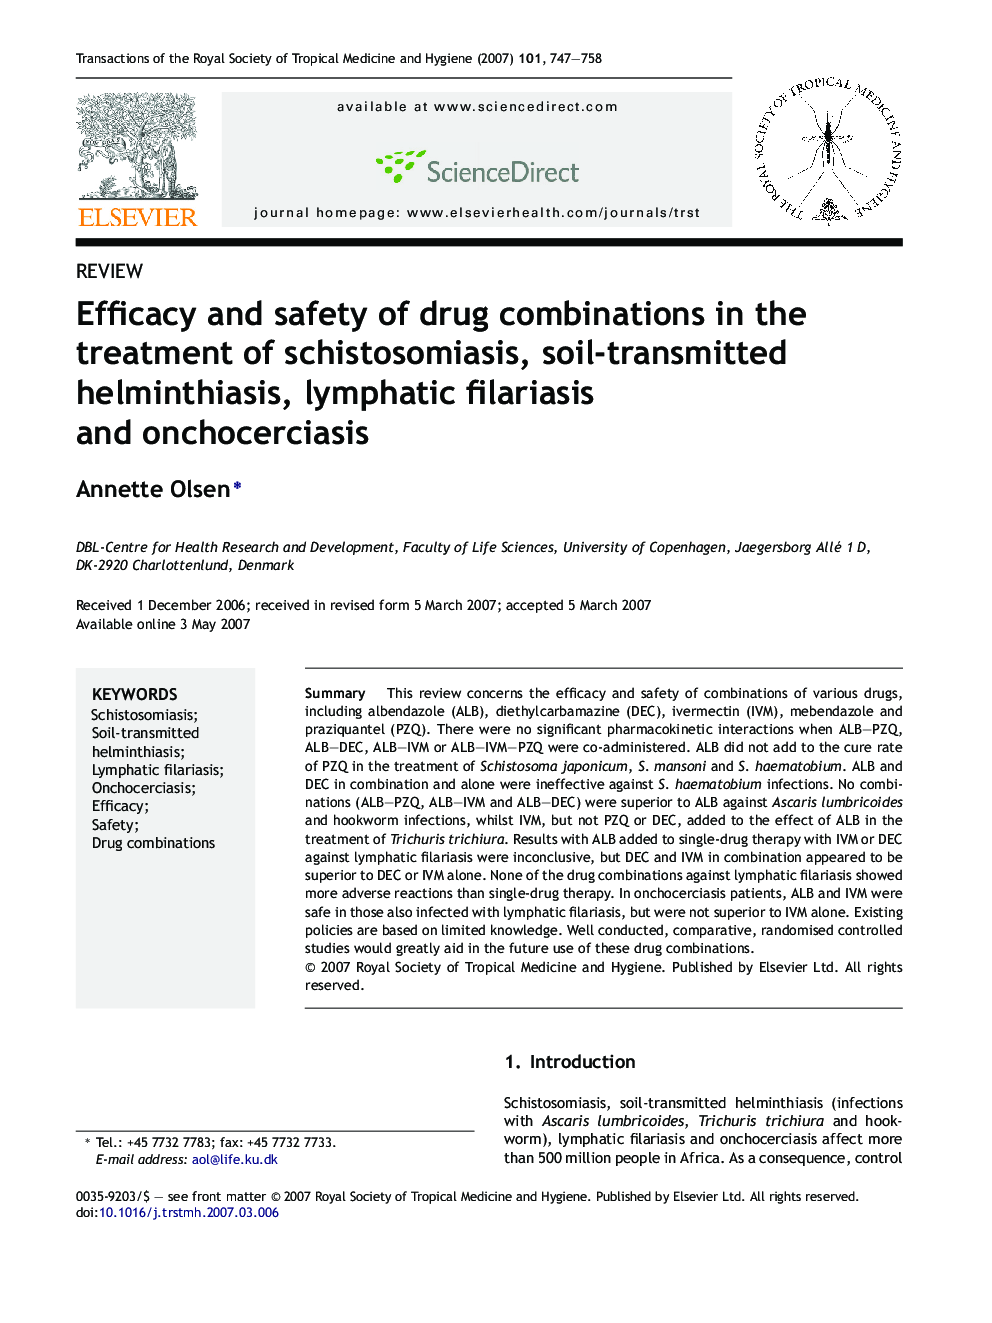 Efficacy and safety of drug combinations in the treatment of schistosomiasis, soil-transmitted helminthiasis, lymphatic filariasis and onchocerciasis